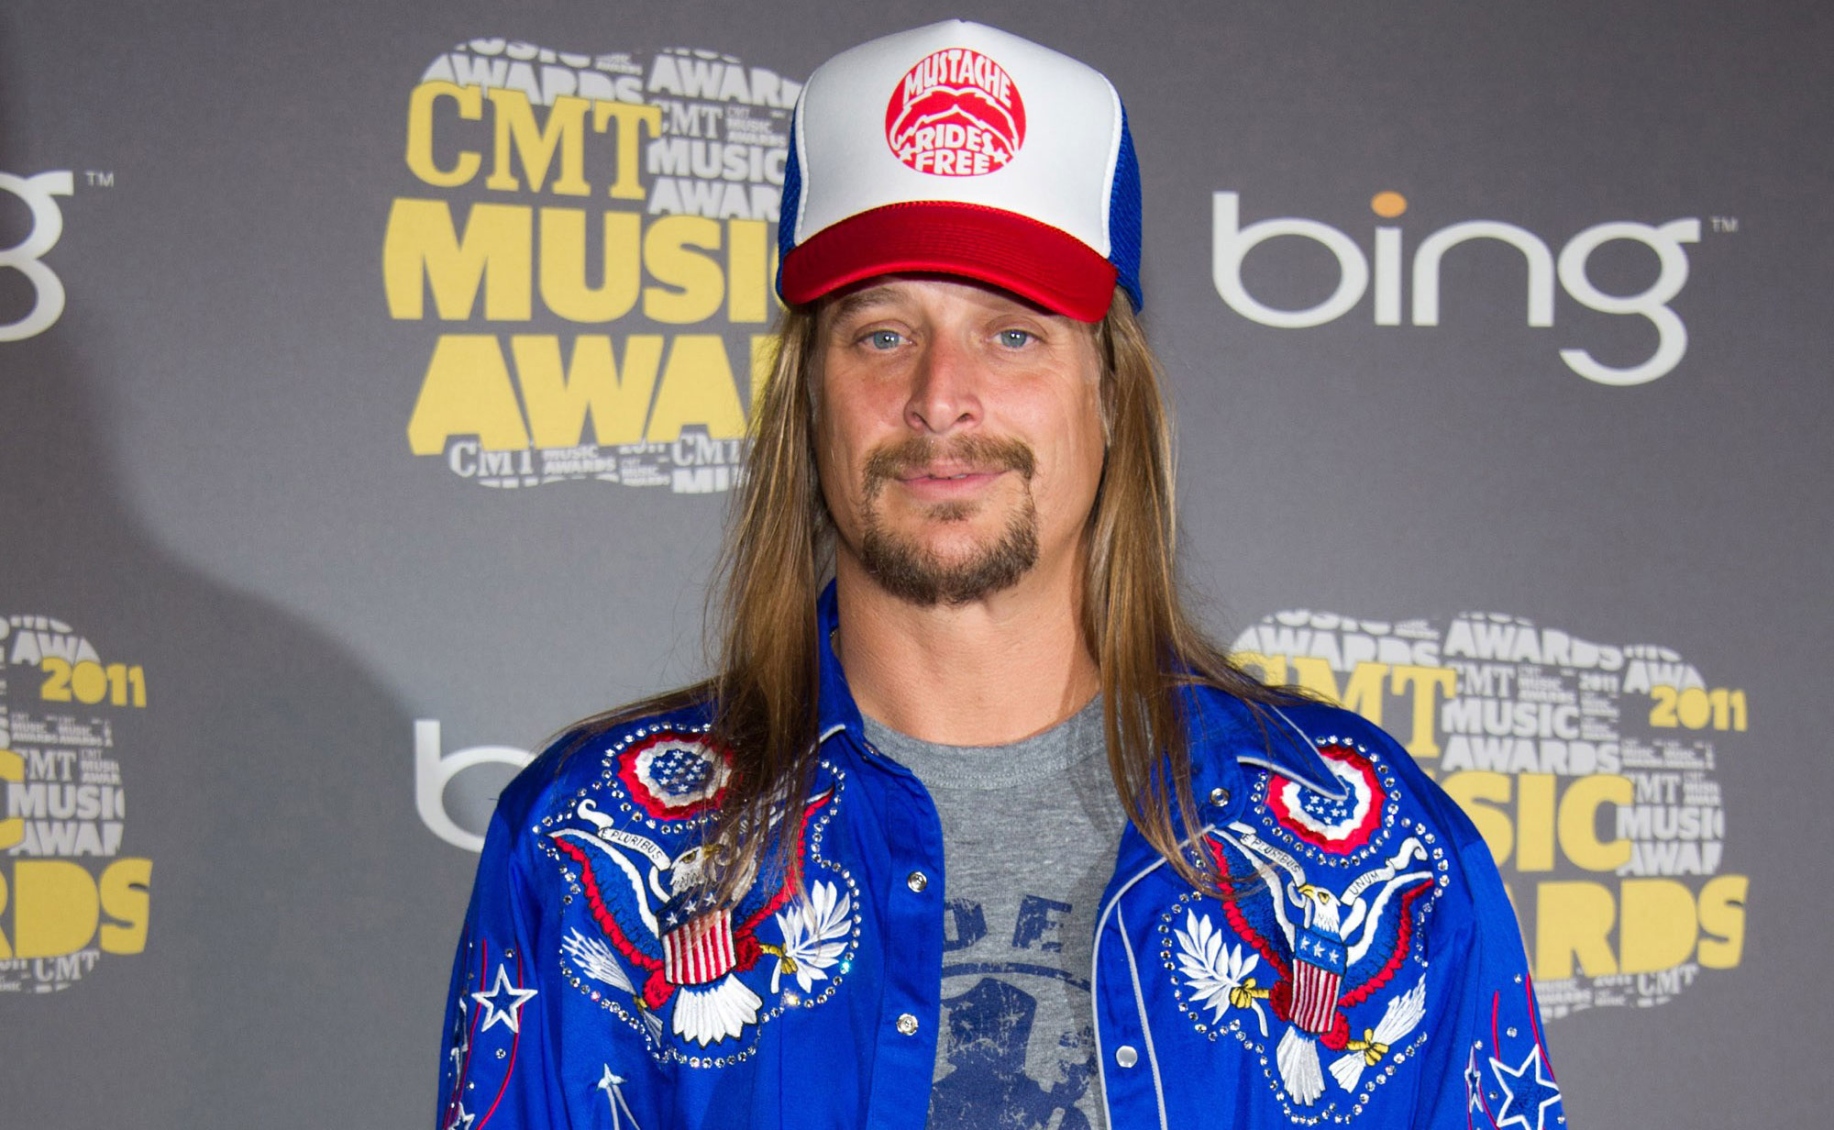 Kid Rock appears backstage at the 2011 CMT Music Awards in Nashville, Tenn. on Wednesday, June 8, 2011. (AP)